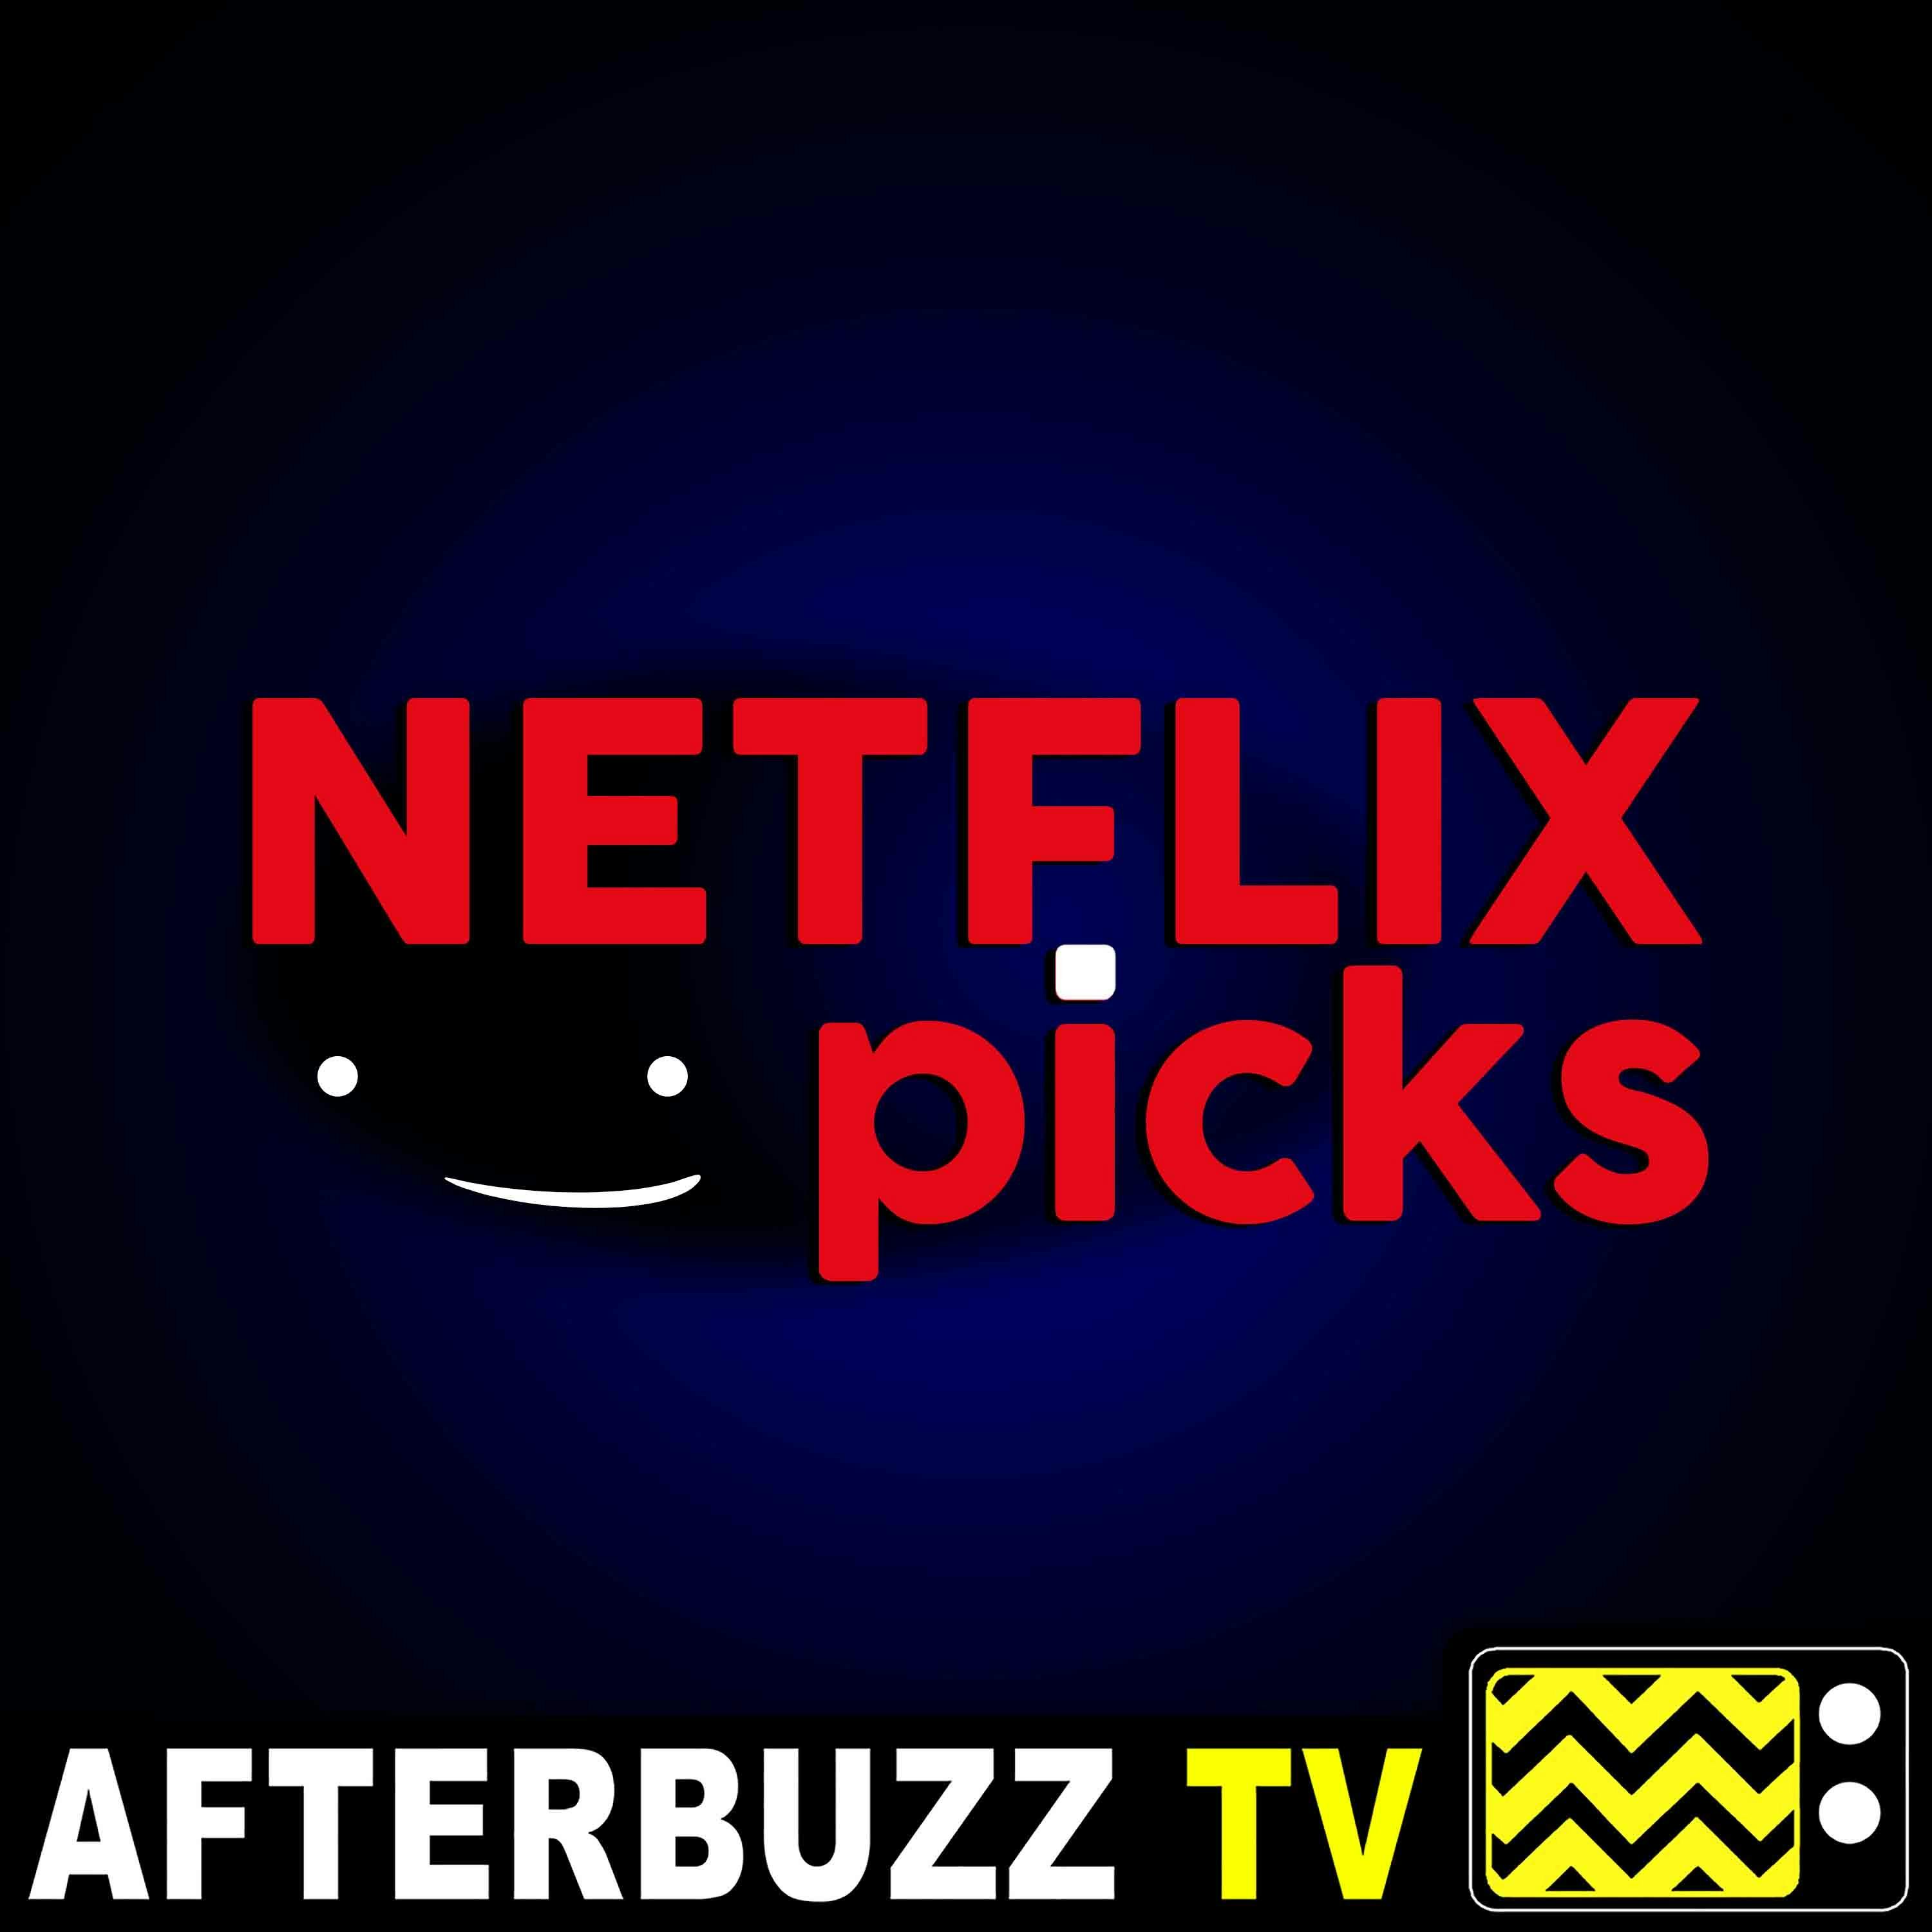 Have you watched Dear White People? We’re breaking down Kimmy Schmidt; Top 5 Upcoming Netflix Releases  – Netflix Picks | AfterBuzz TV